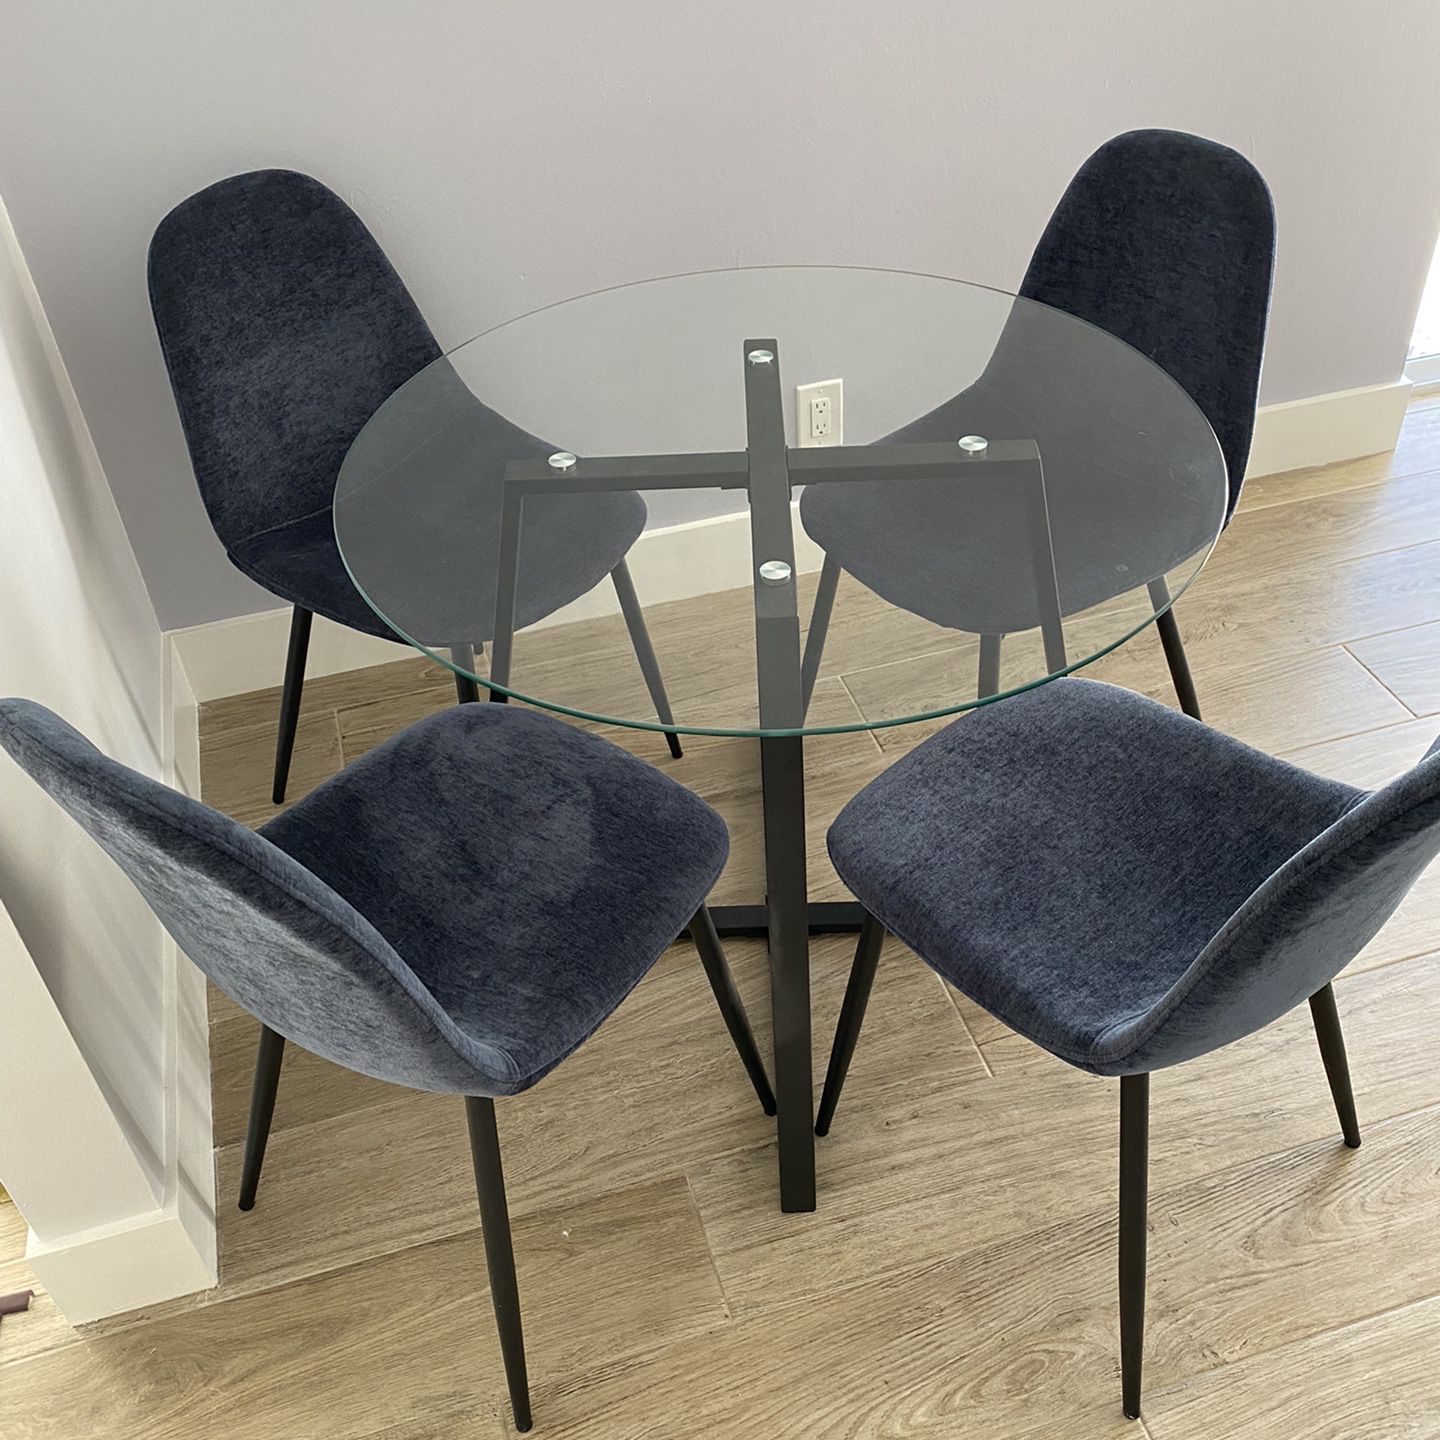 4 person Dining Table & Chair Set